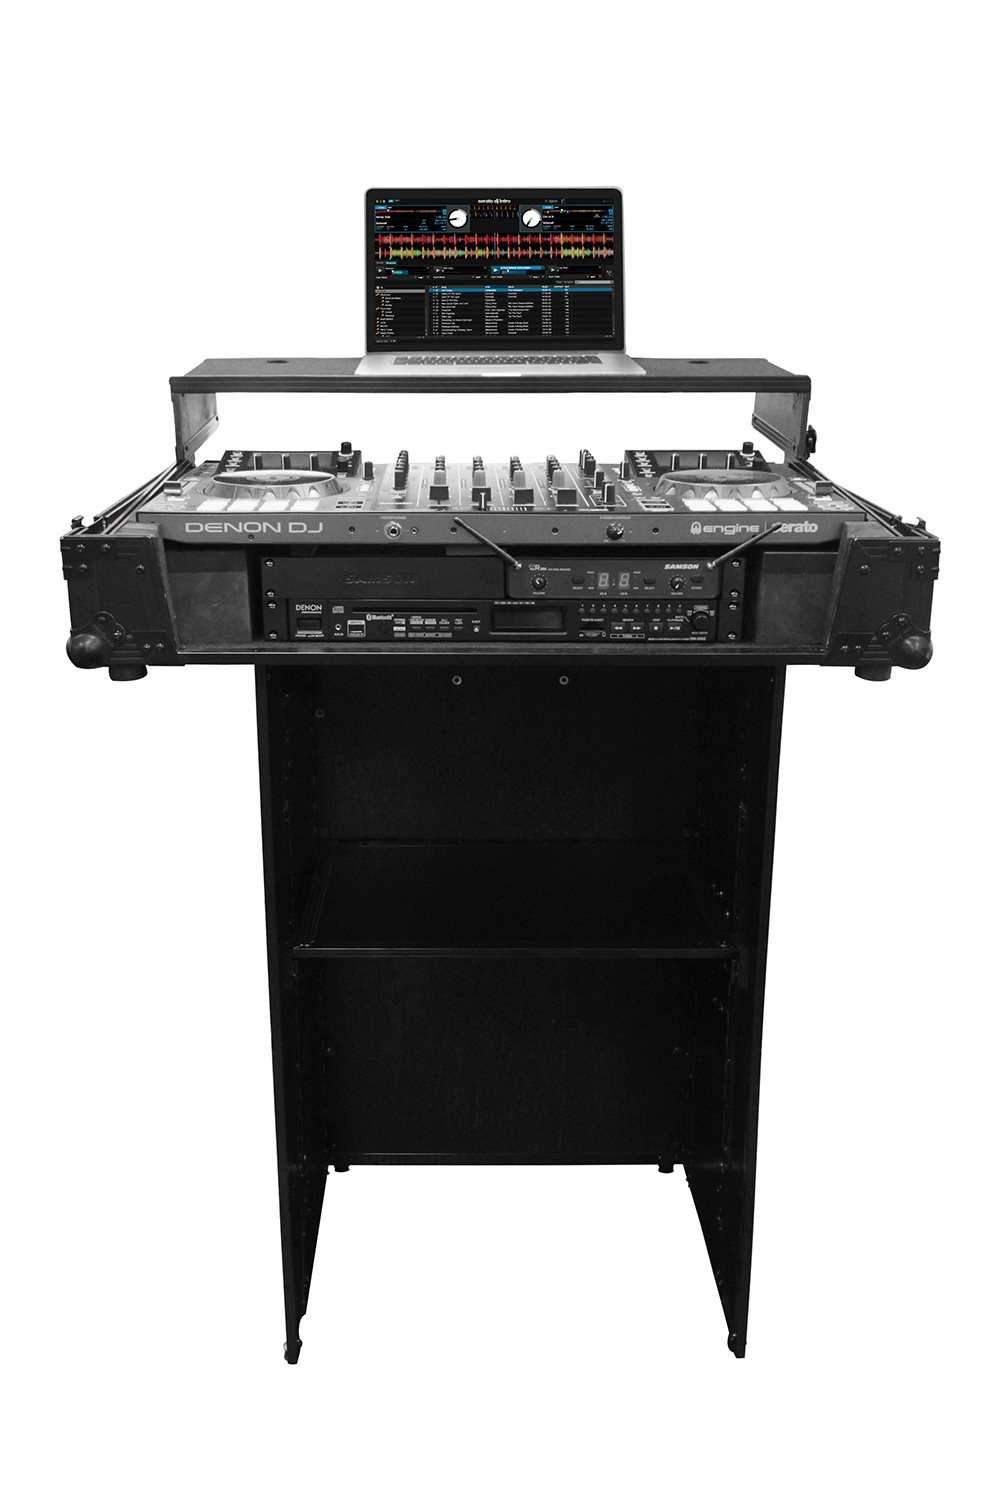 Odyssey FZF2136BL Black Label 21 x 36-Inch Fold-Out DJ Facade - ProSound and Stage Lighting